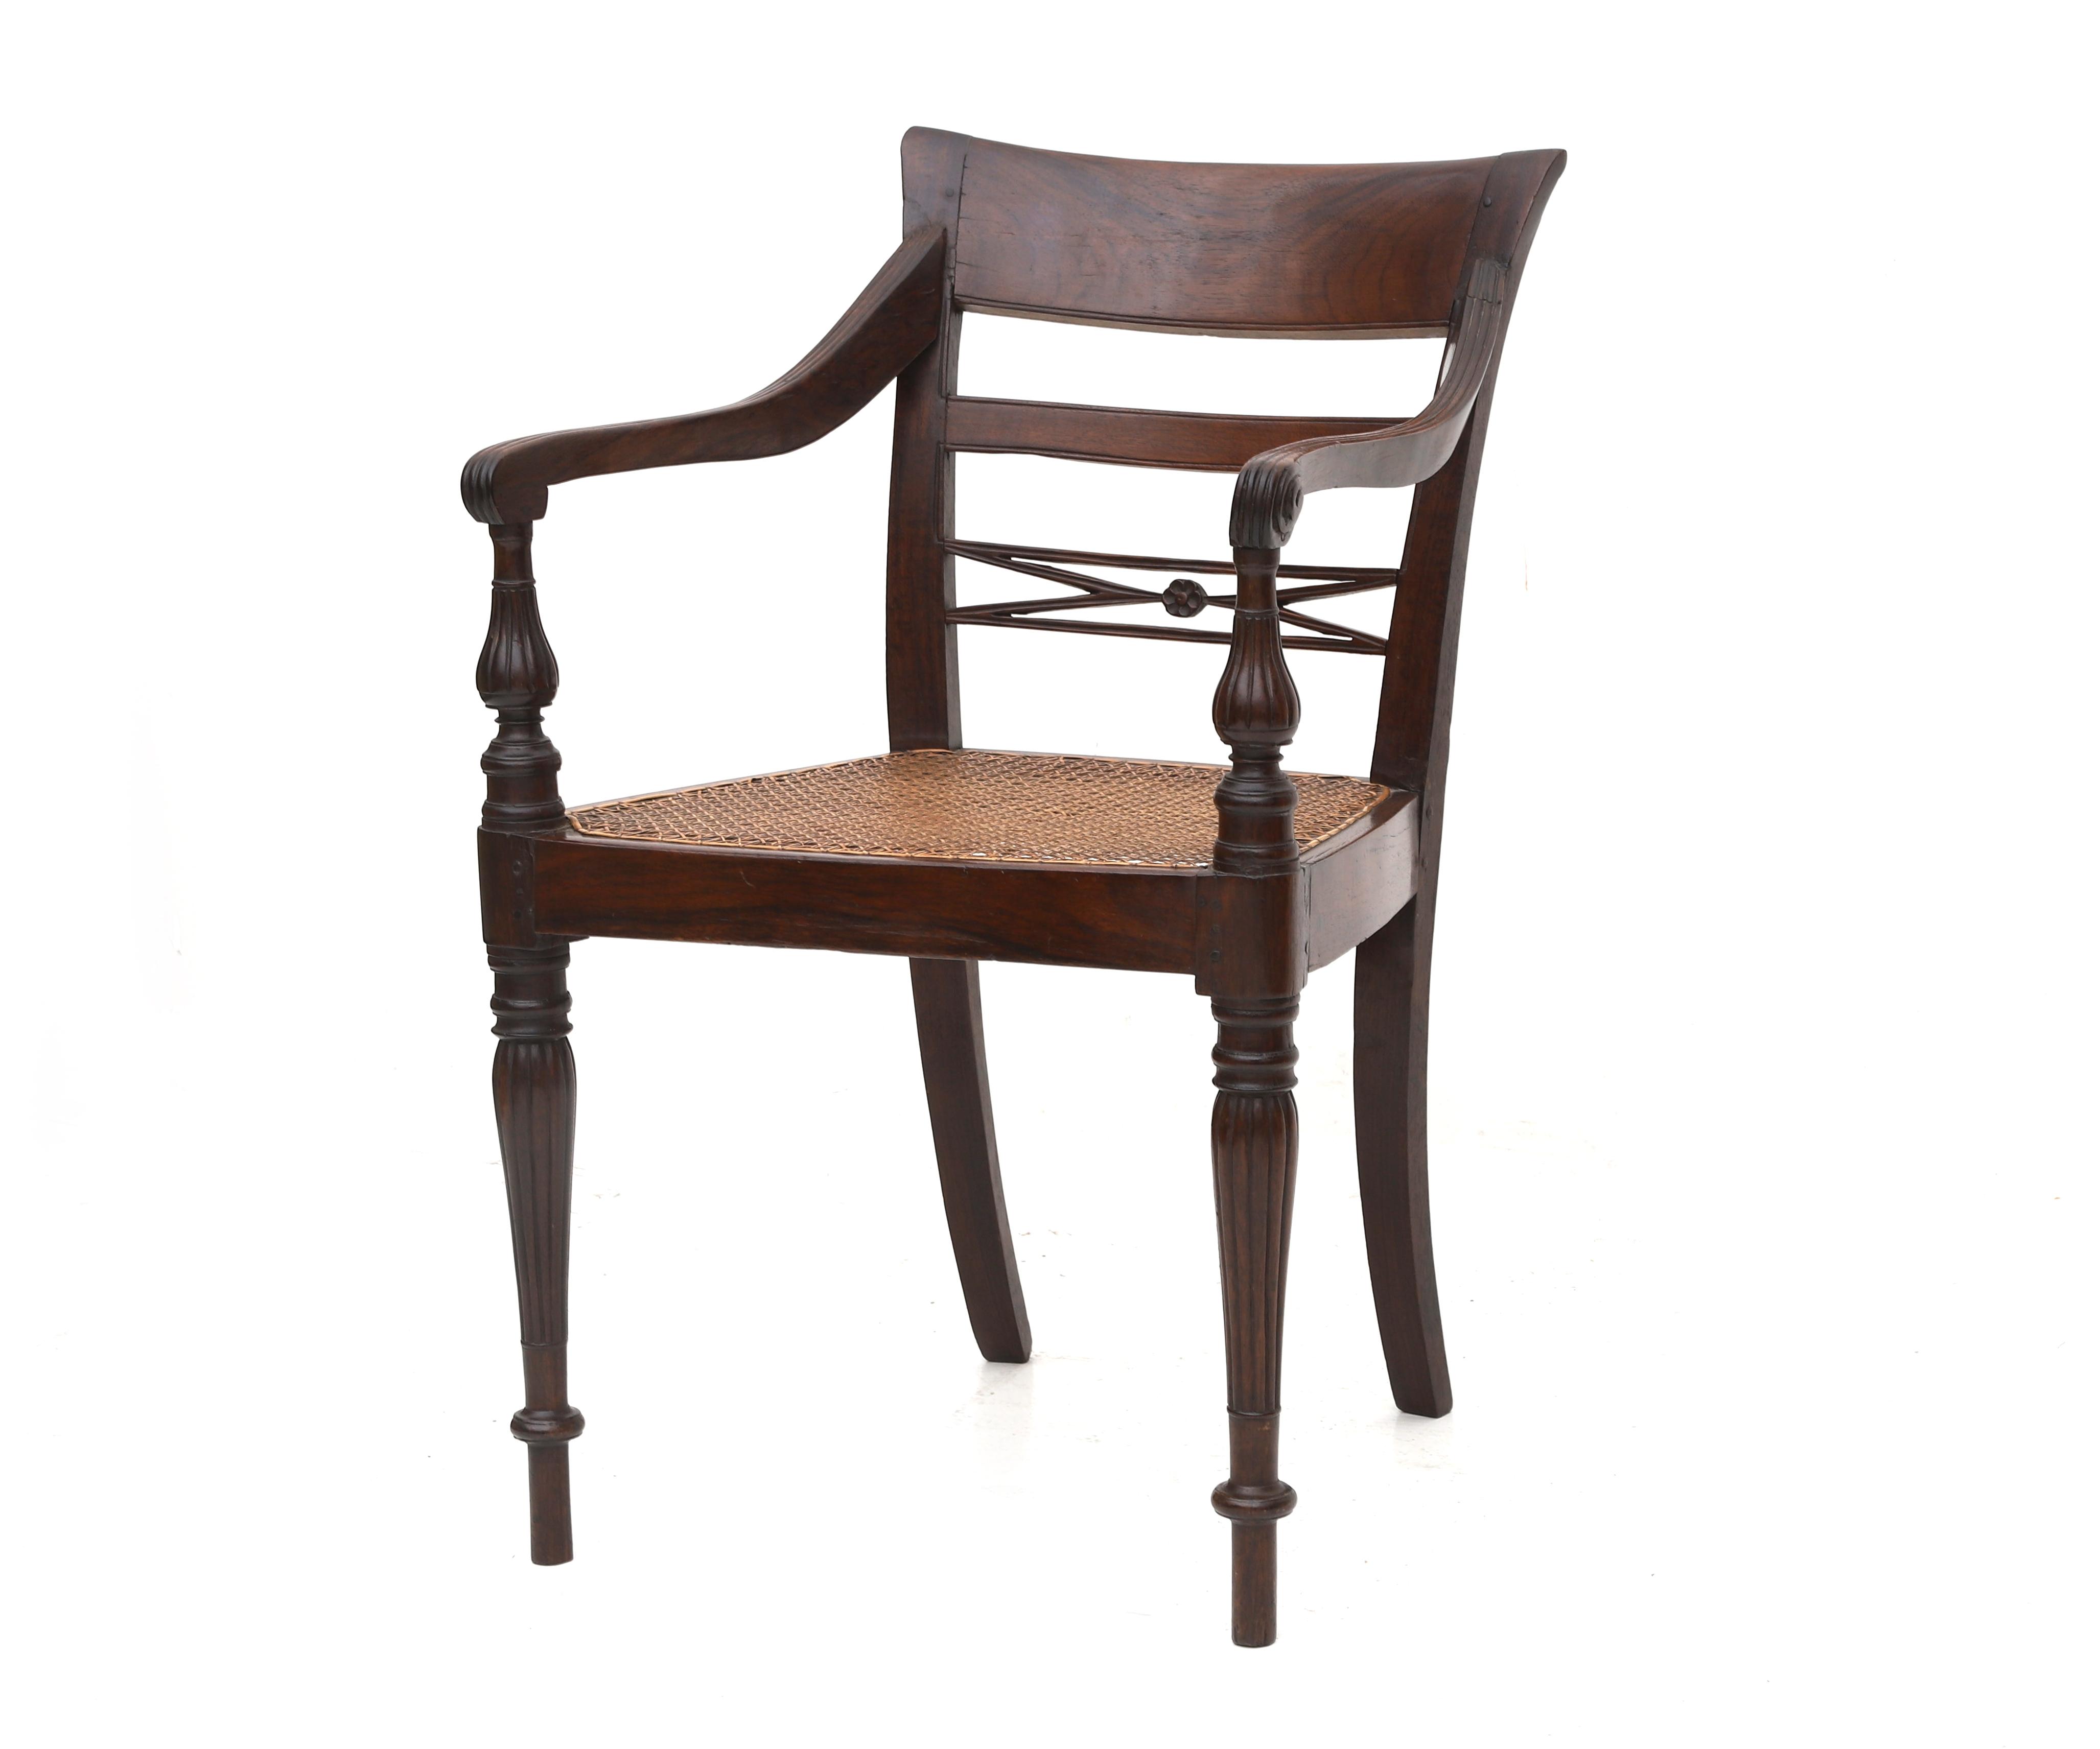 The open back with carved ornaments, webbing seat, armrests with carved details, four tapering